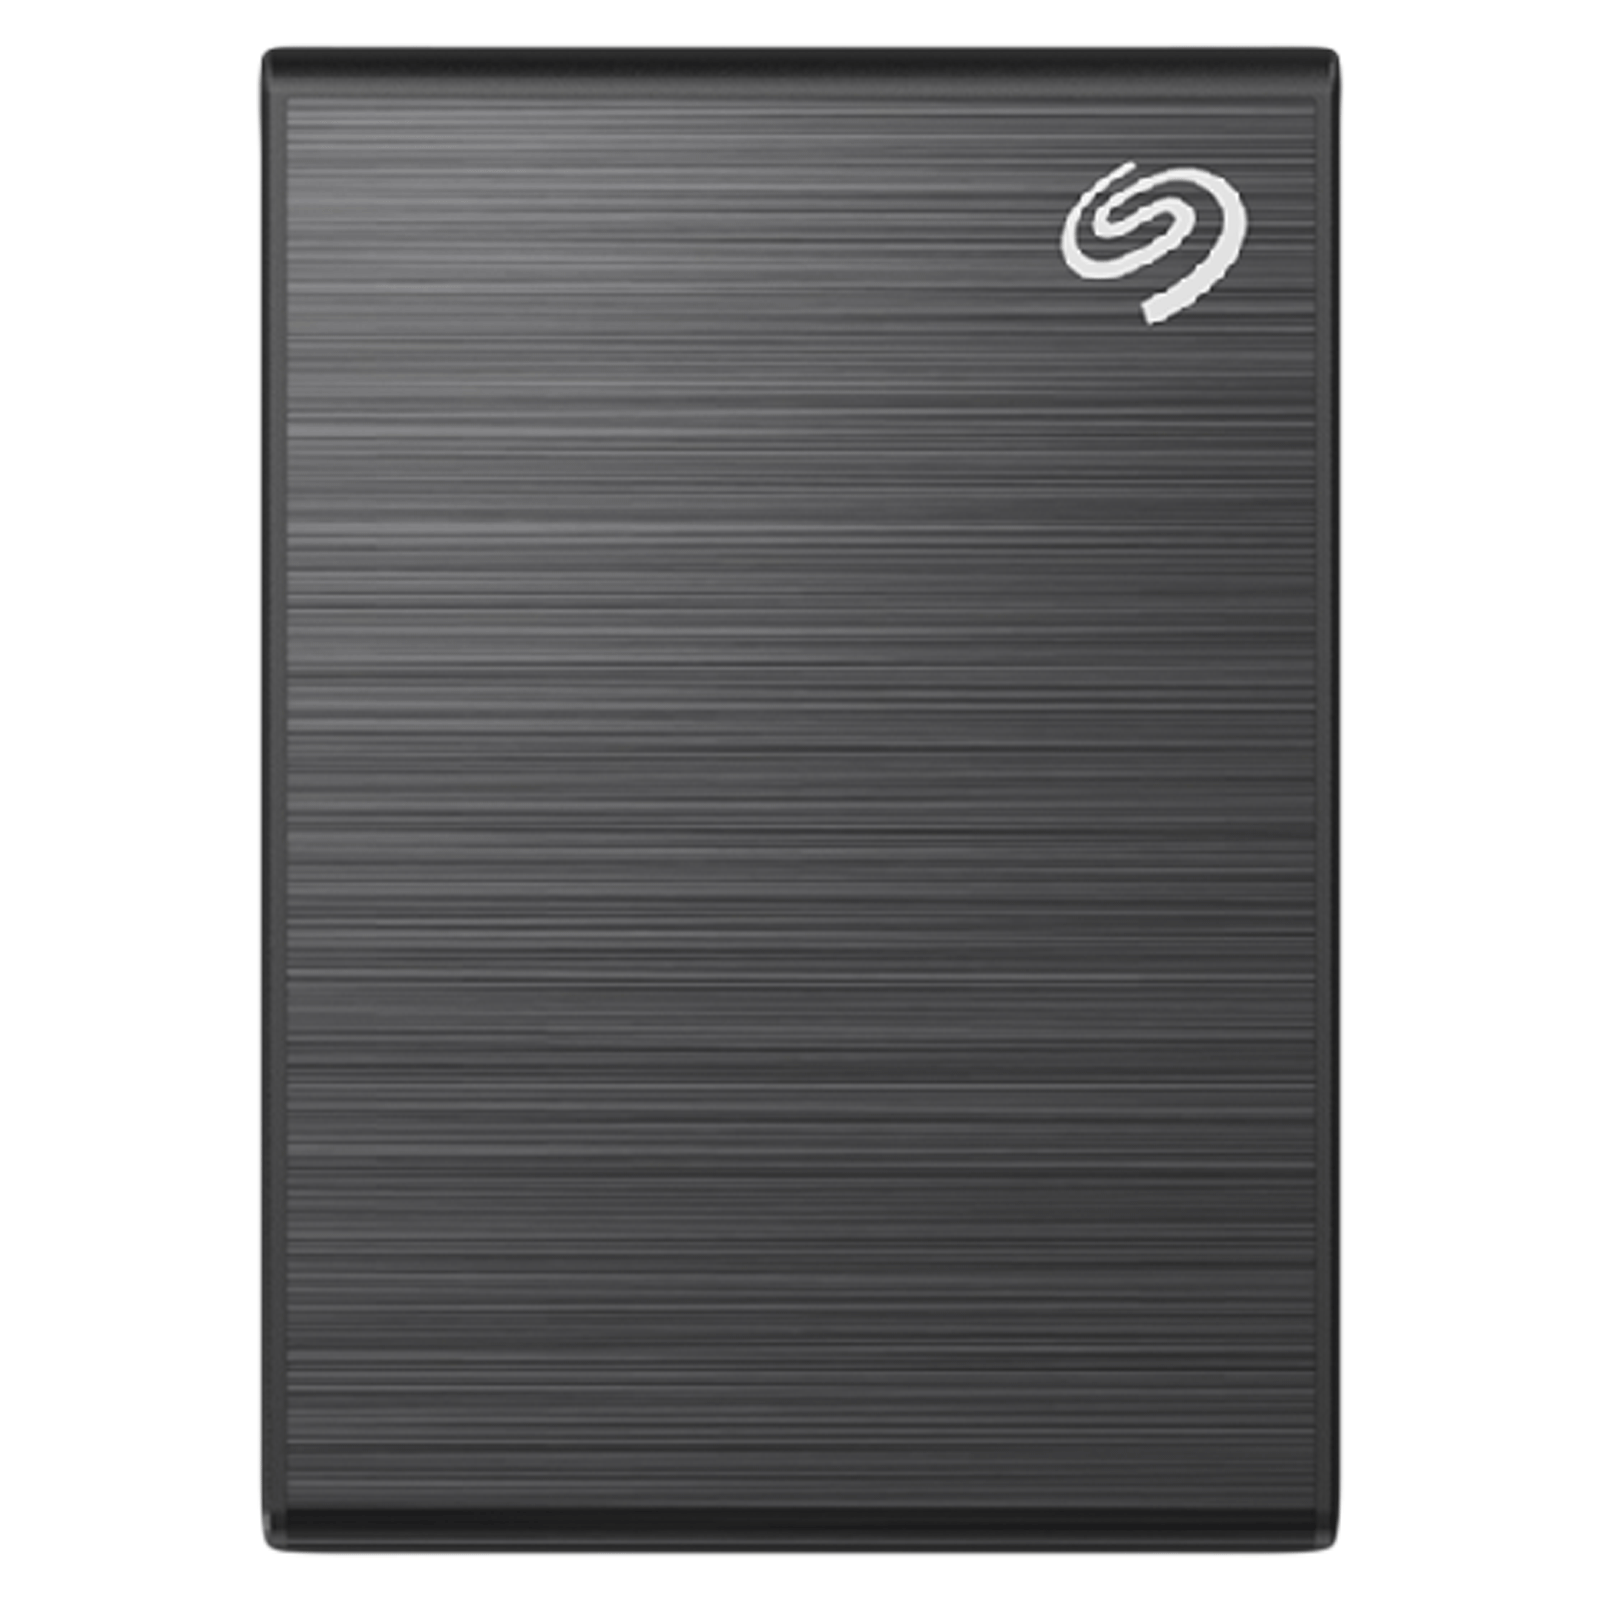 Seagate One Touch 500GB USB Type-C 3.0 Solid State Drive (Multi-Device Compatibility, STKG500400, Black)